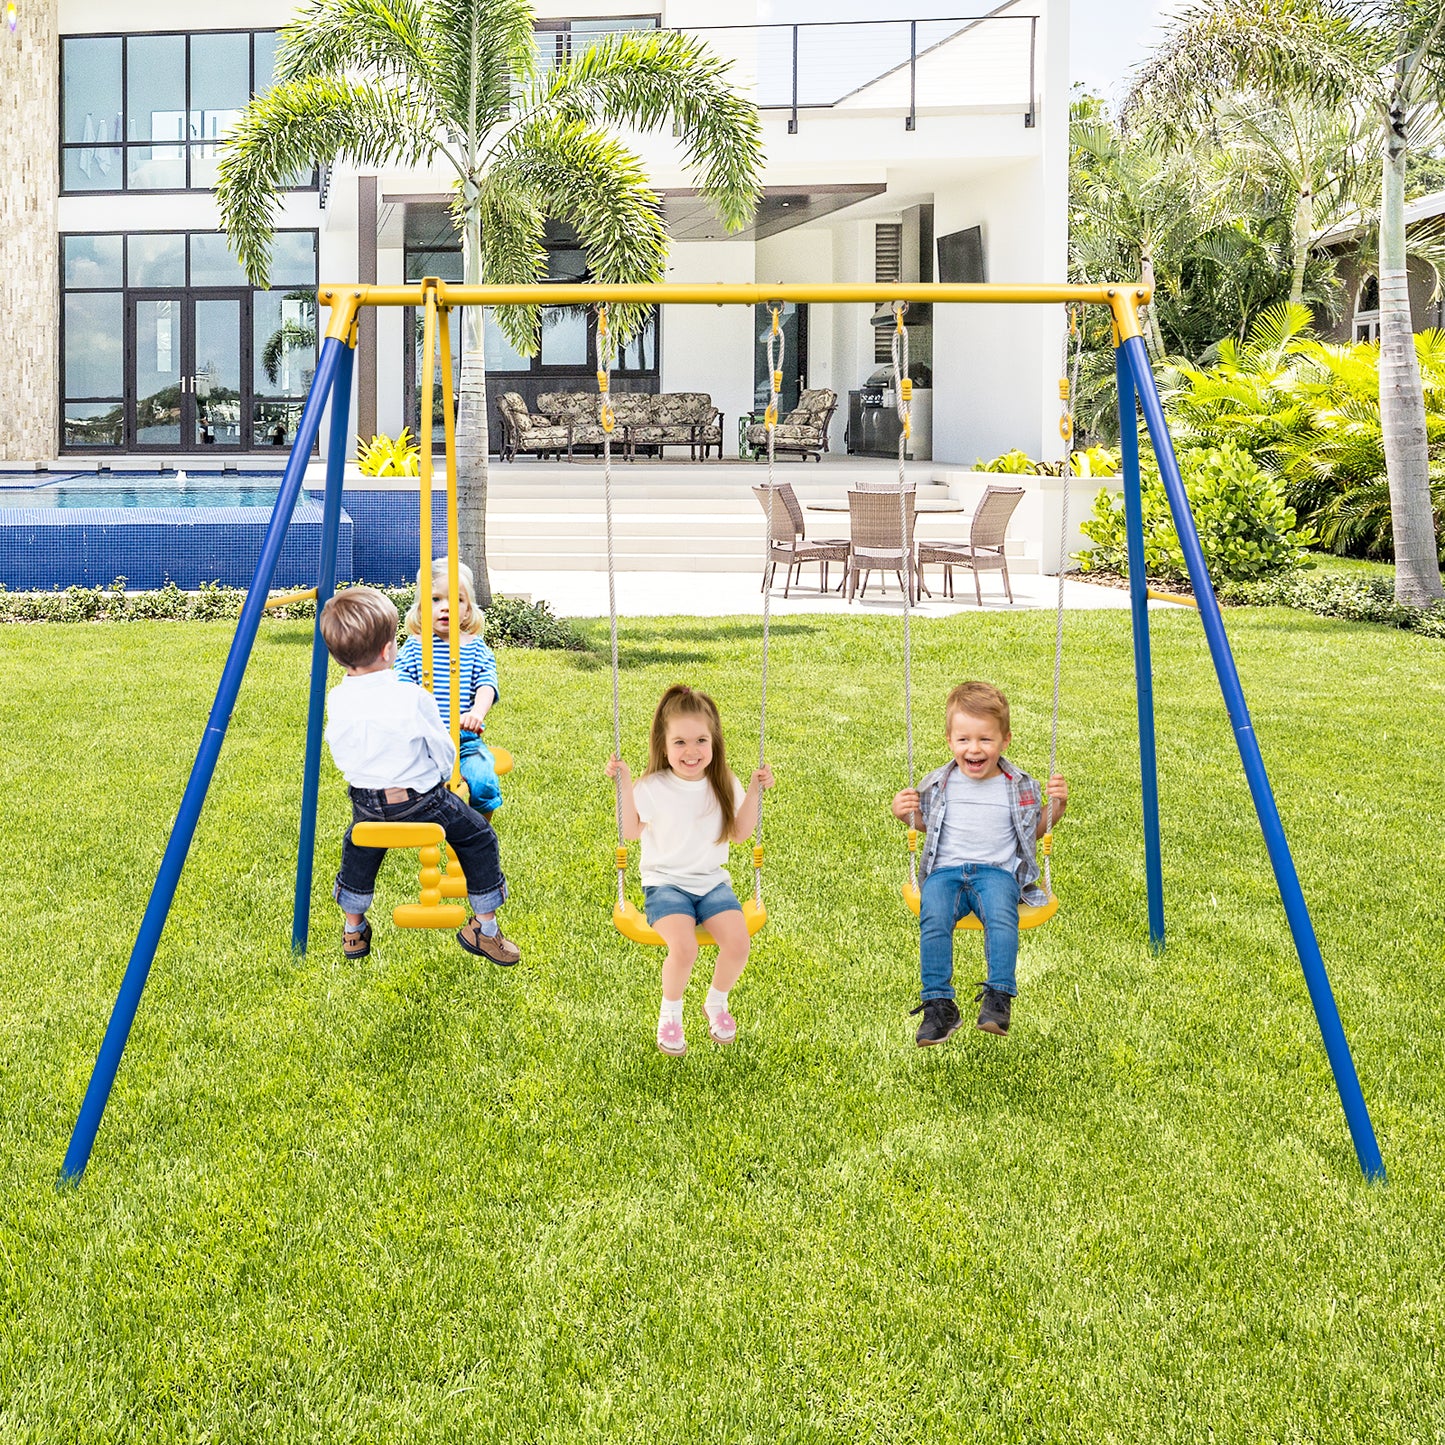 Metal Swing Set for Backyard with 2 Swing Seats and 2 Glider Seats-Blue